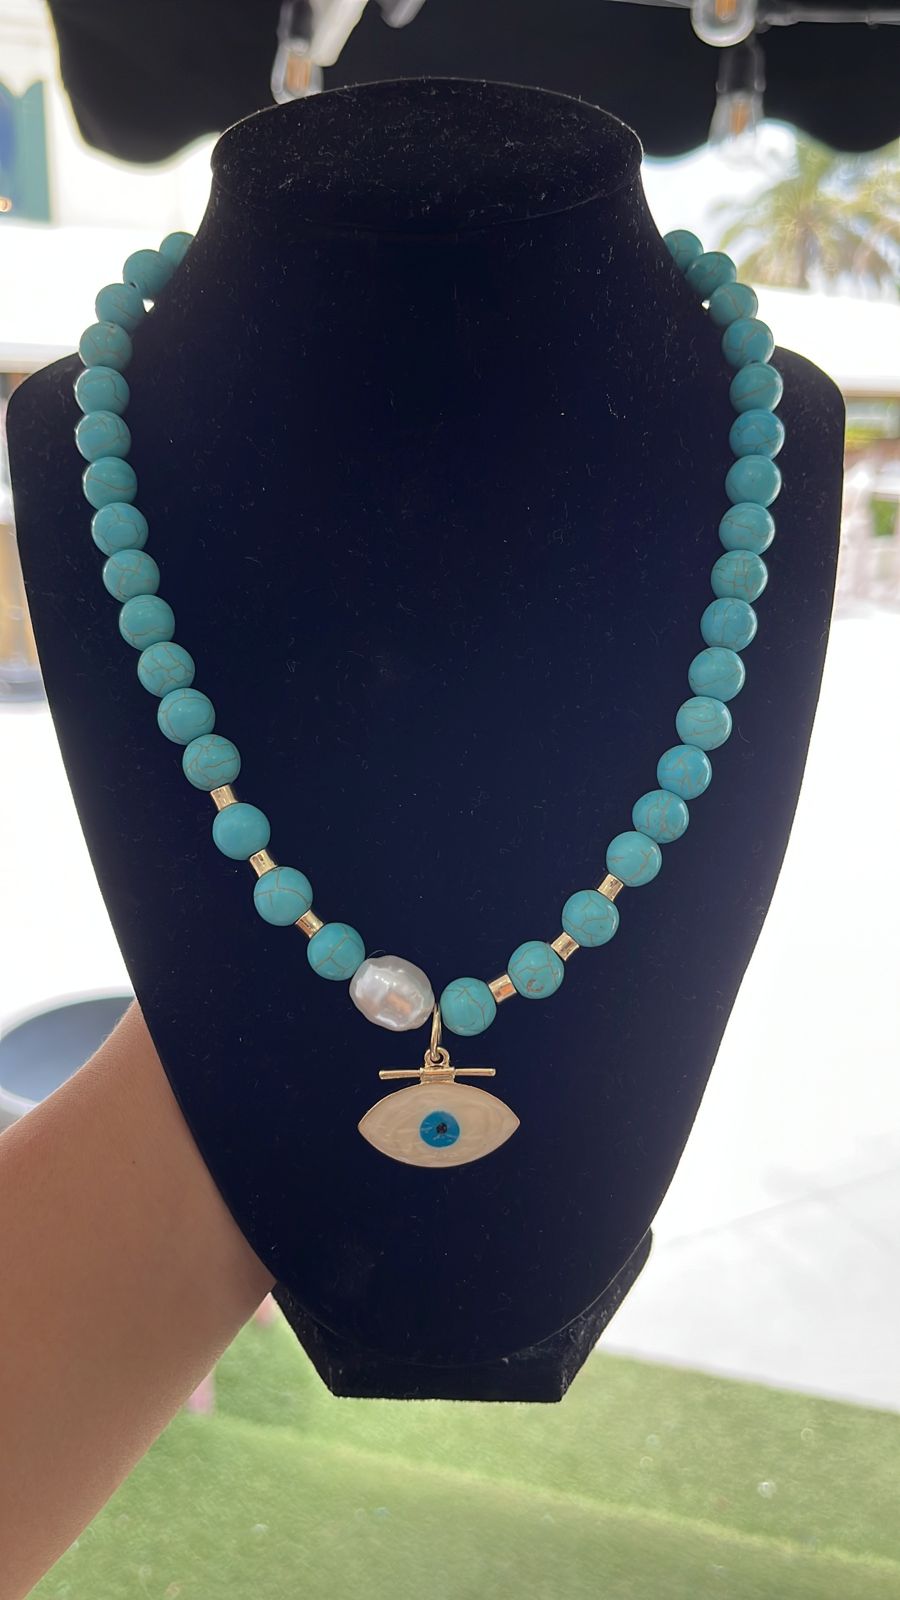 Blue necklace beads center pearl and evil eye pendant